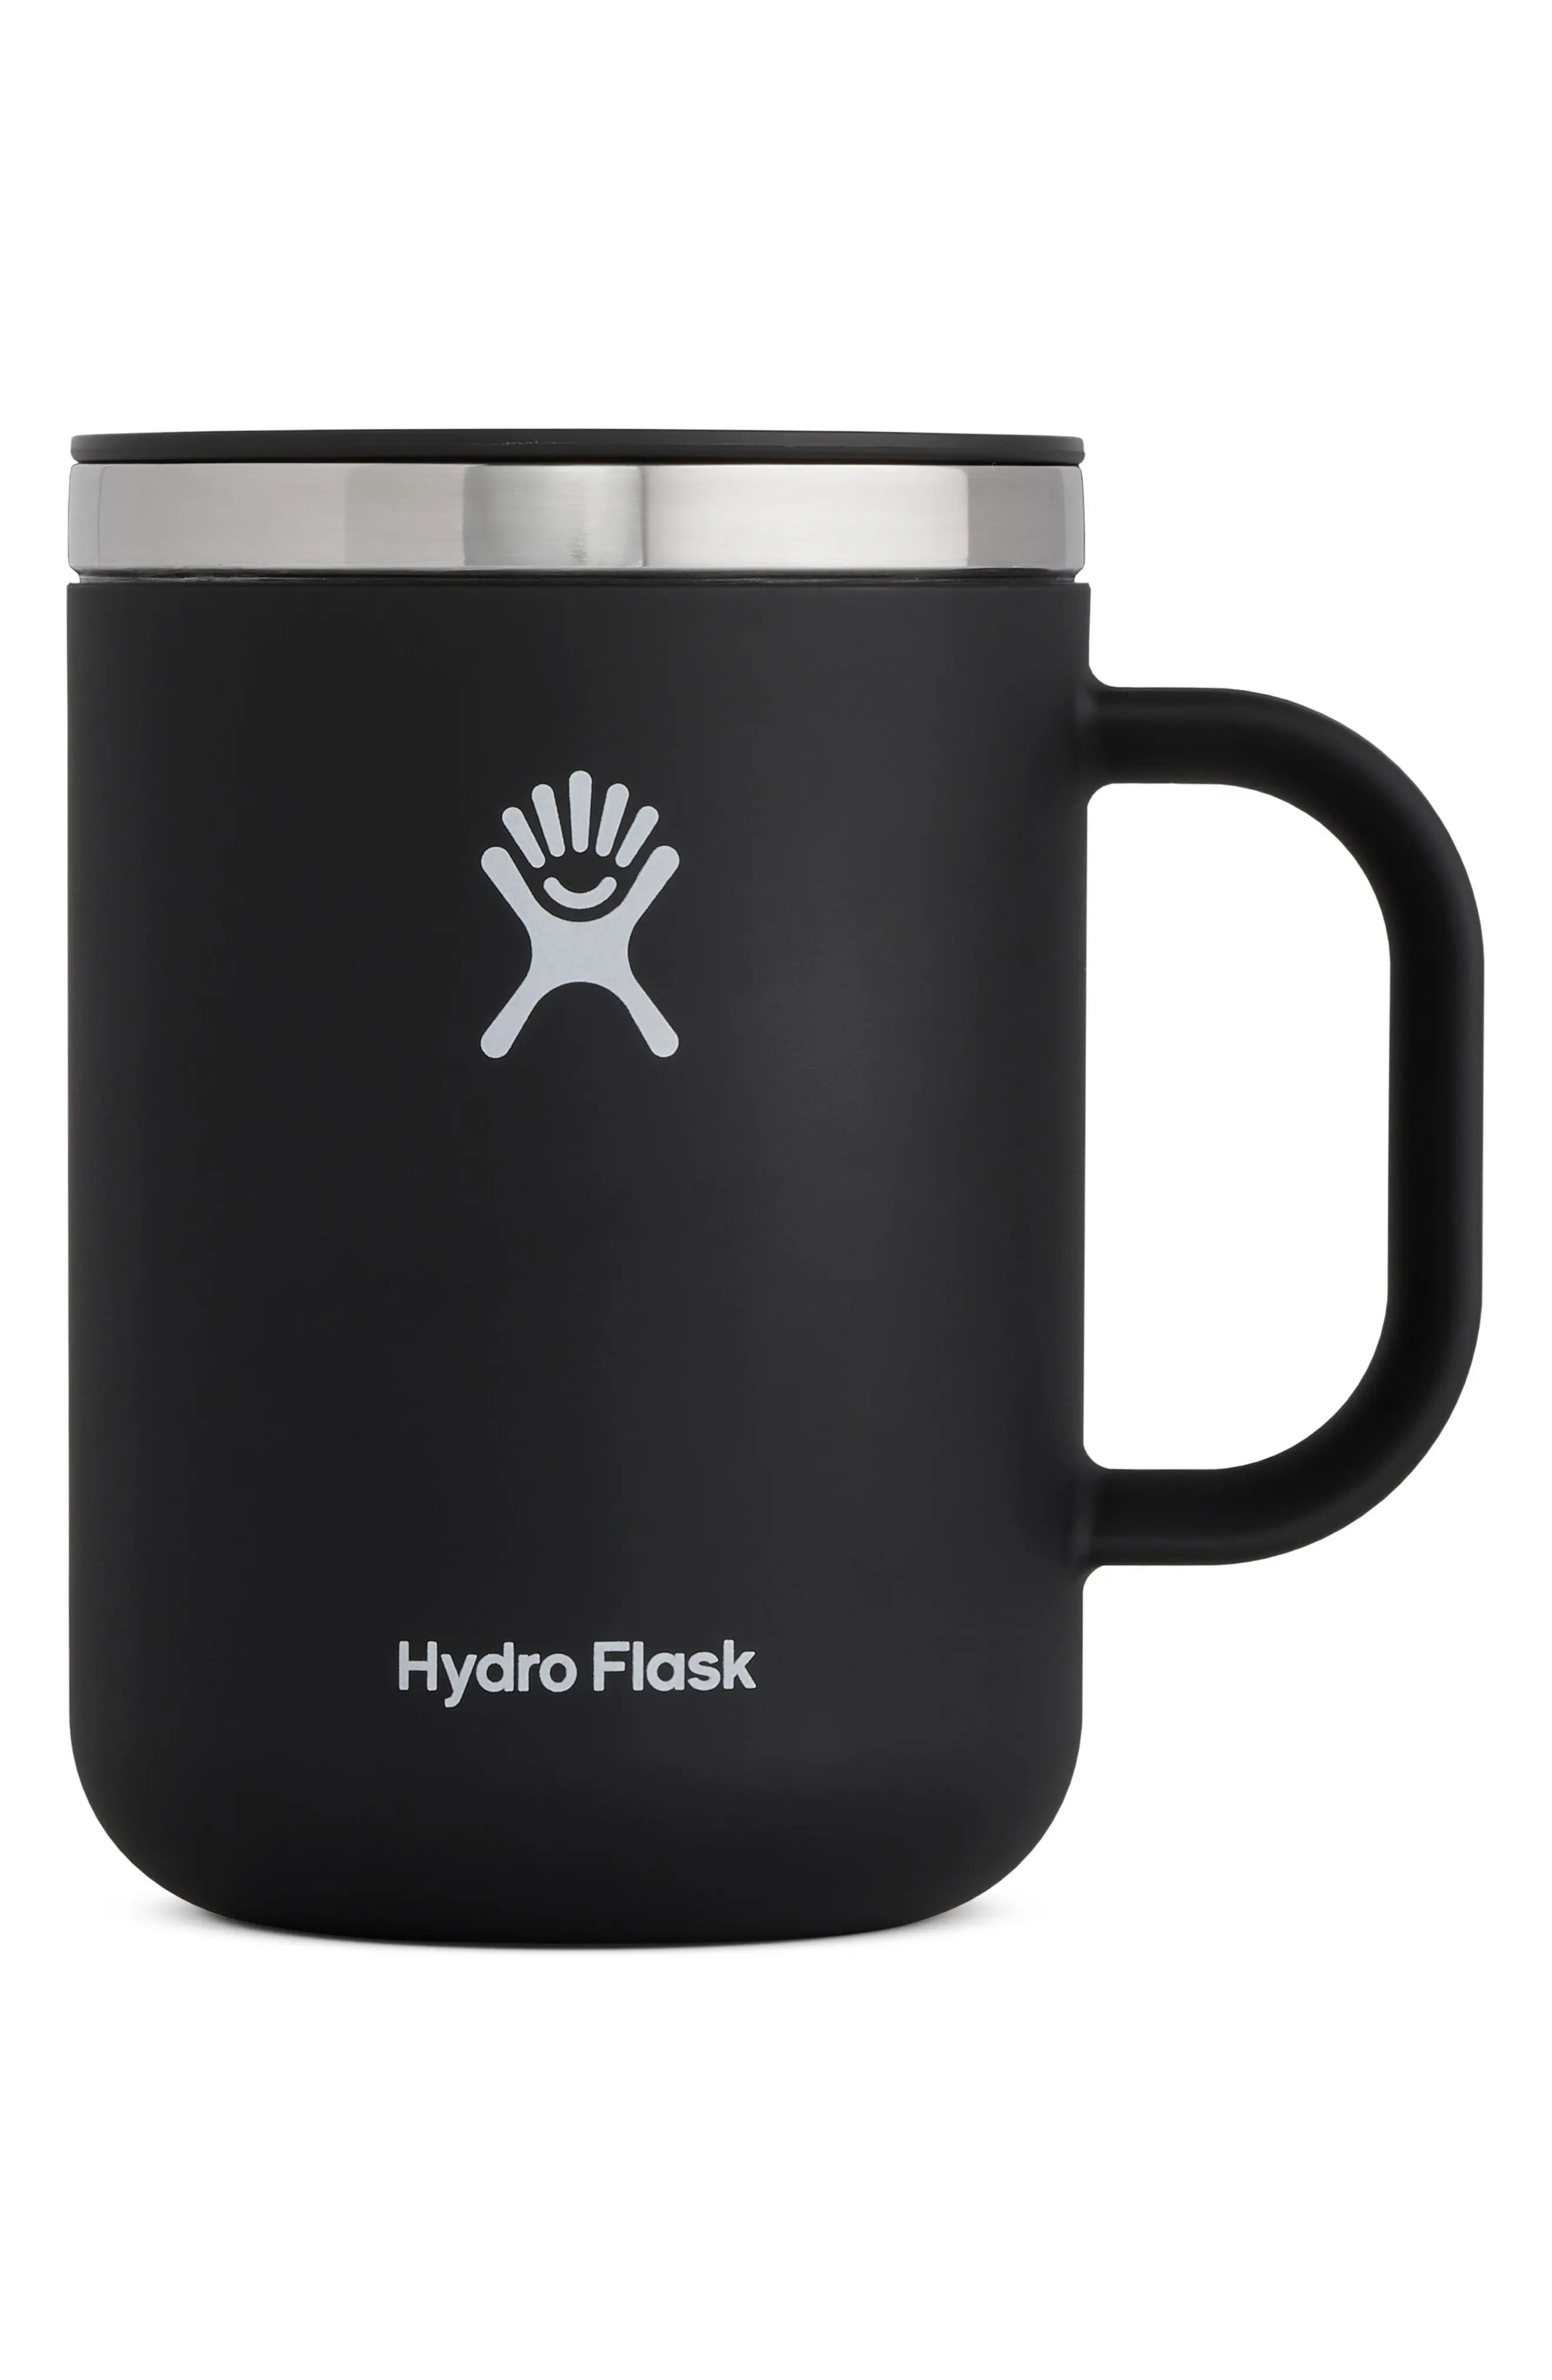 Hydro Flask 24-Ounce Mug in Black at Nordstrom | Nordstrom